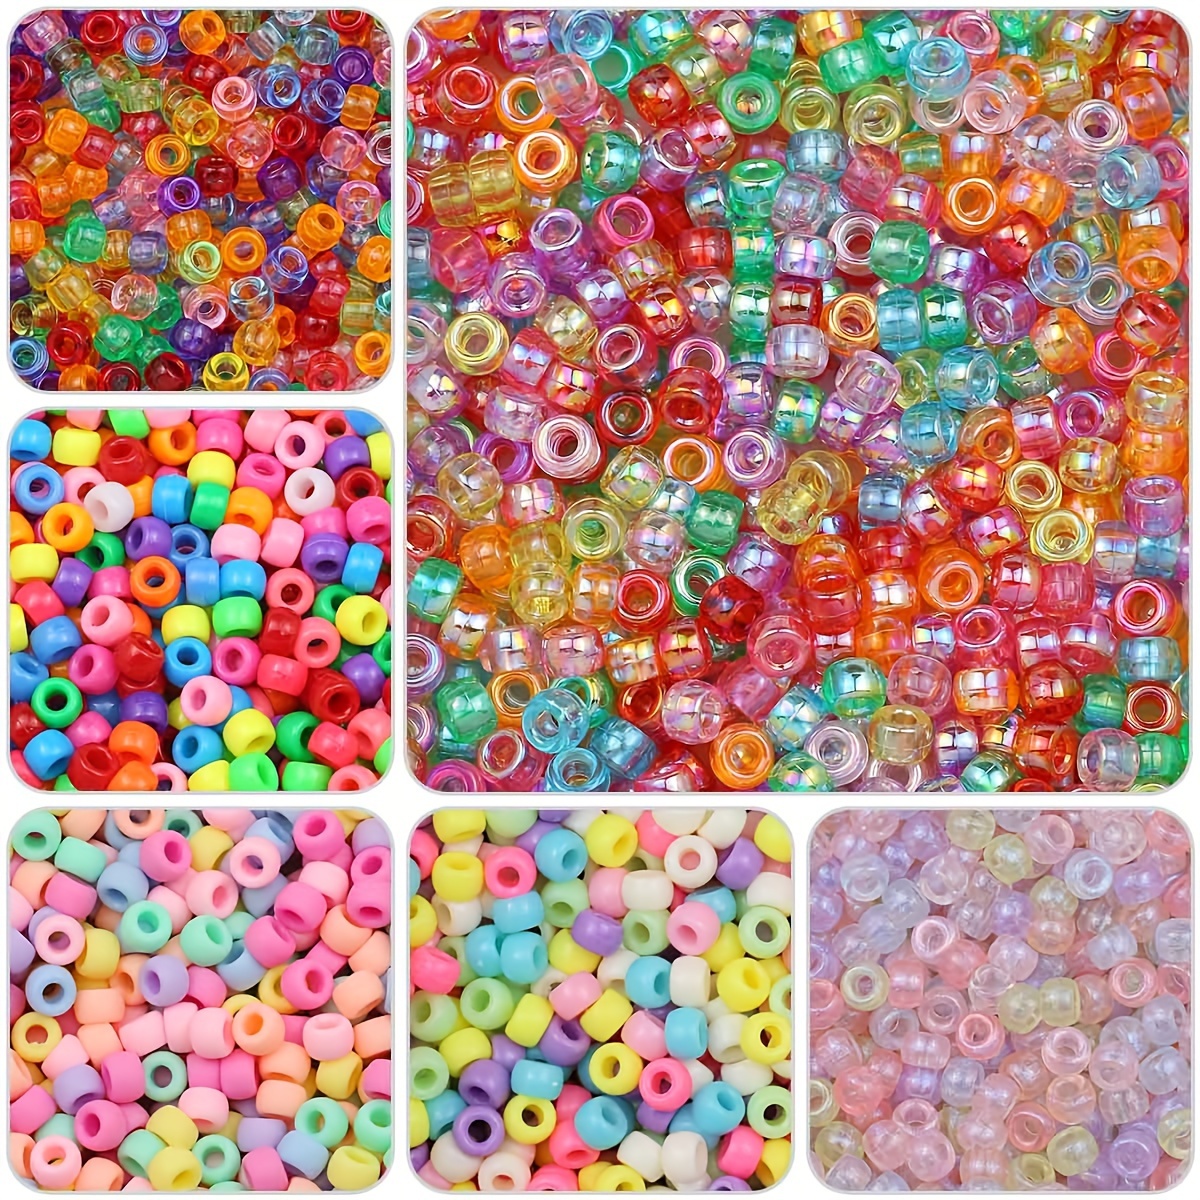 

200pcs 6*9mm Mixed Color Large Hole Acrylic Loose Beads For Jewelry Making Handmade Diy Braided Bracelet Necklace Earrings Beaded Craft Supplies